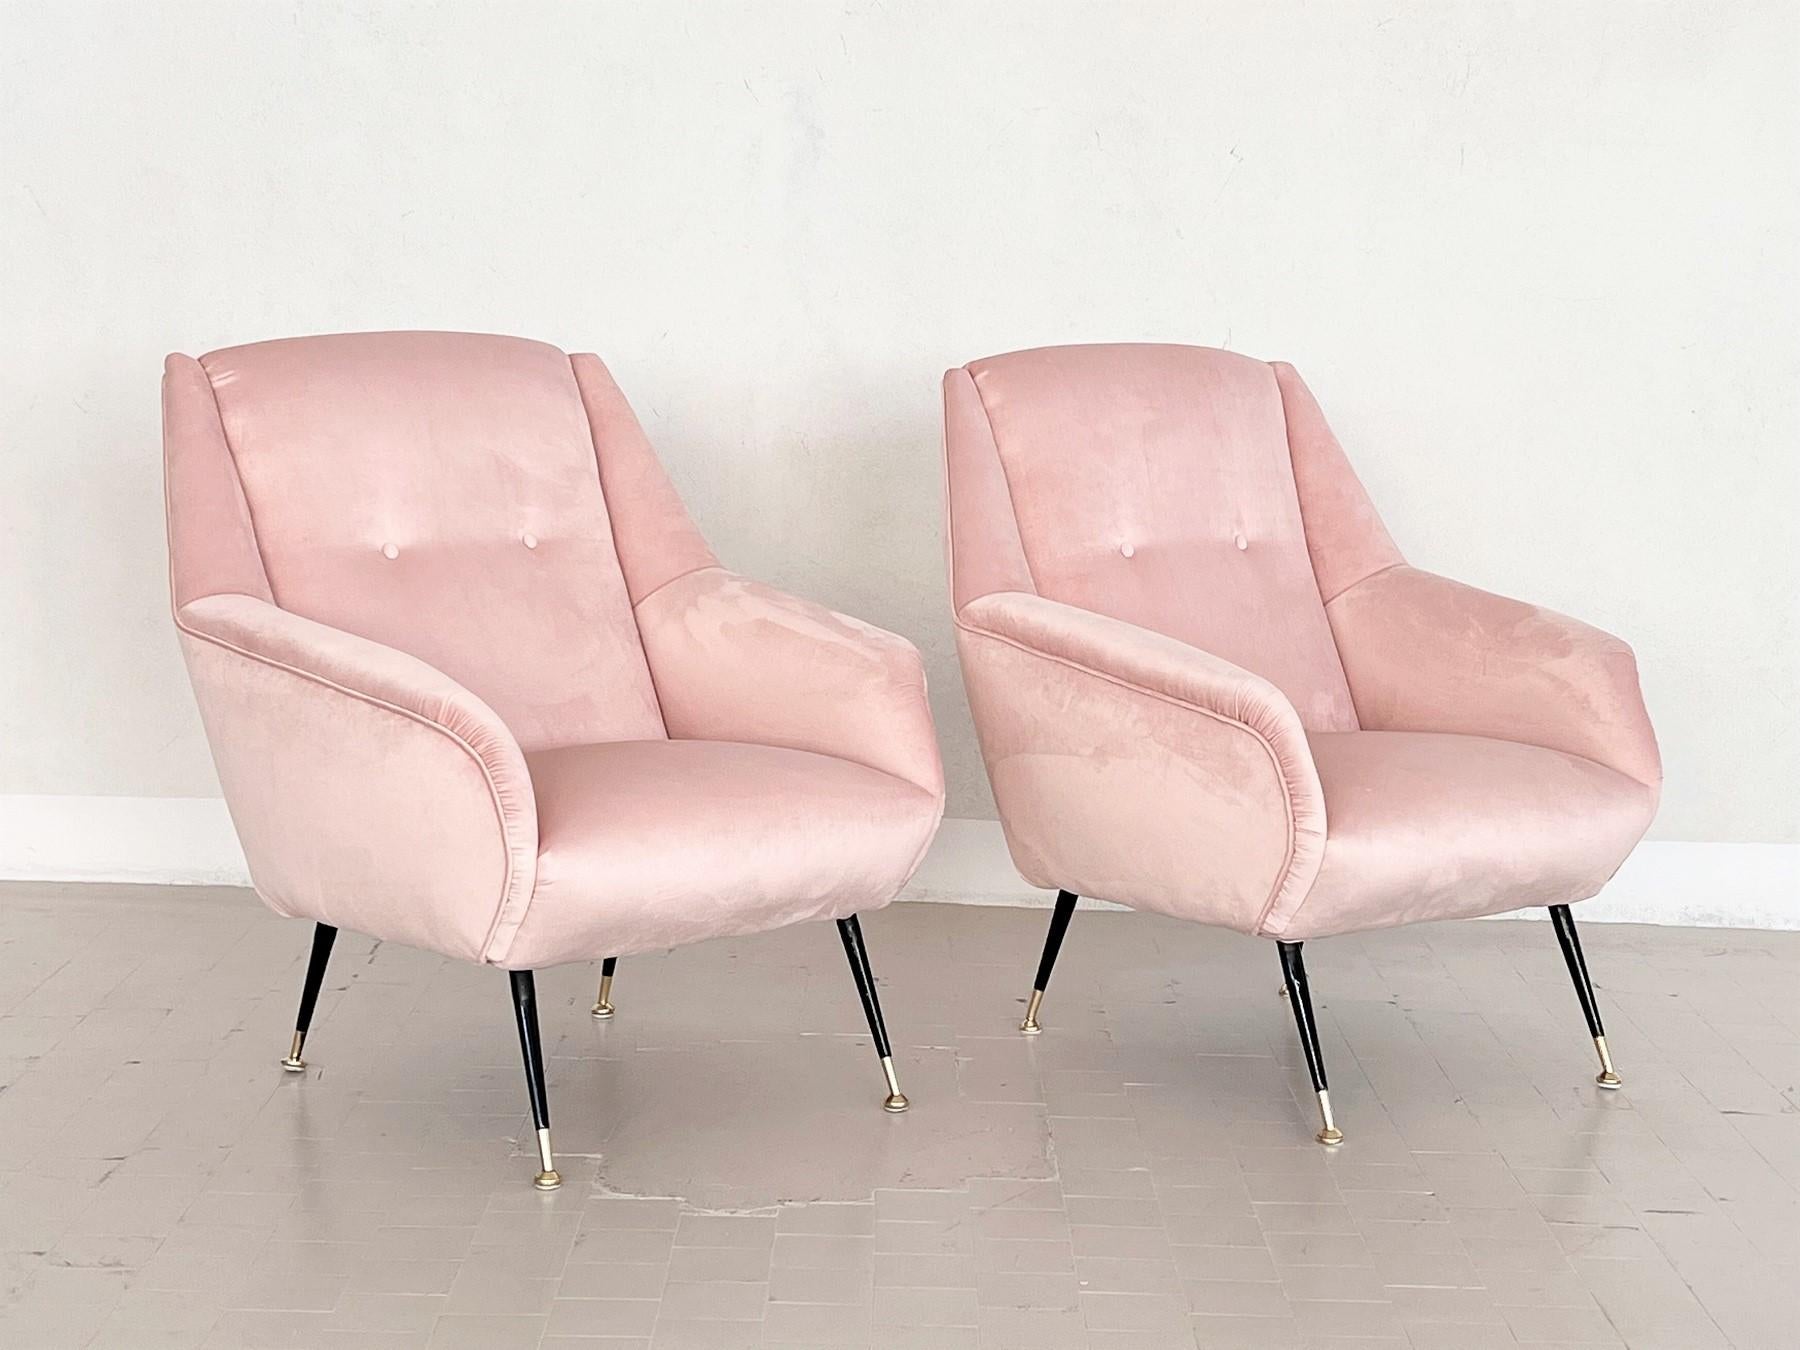 Italian Midcentury Armchairs in Soft Pink Velvet and Brass Tips, 1950s For Sale 1